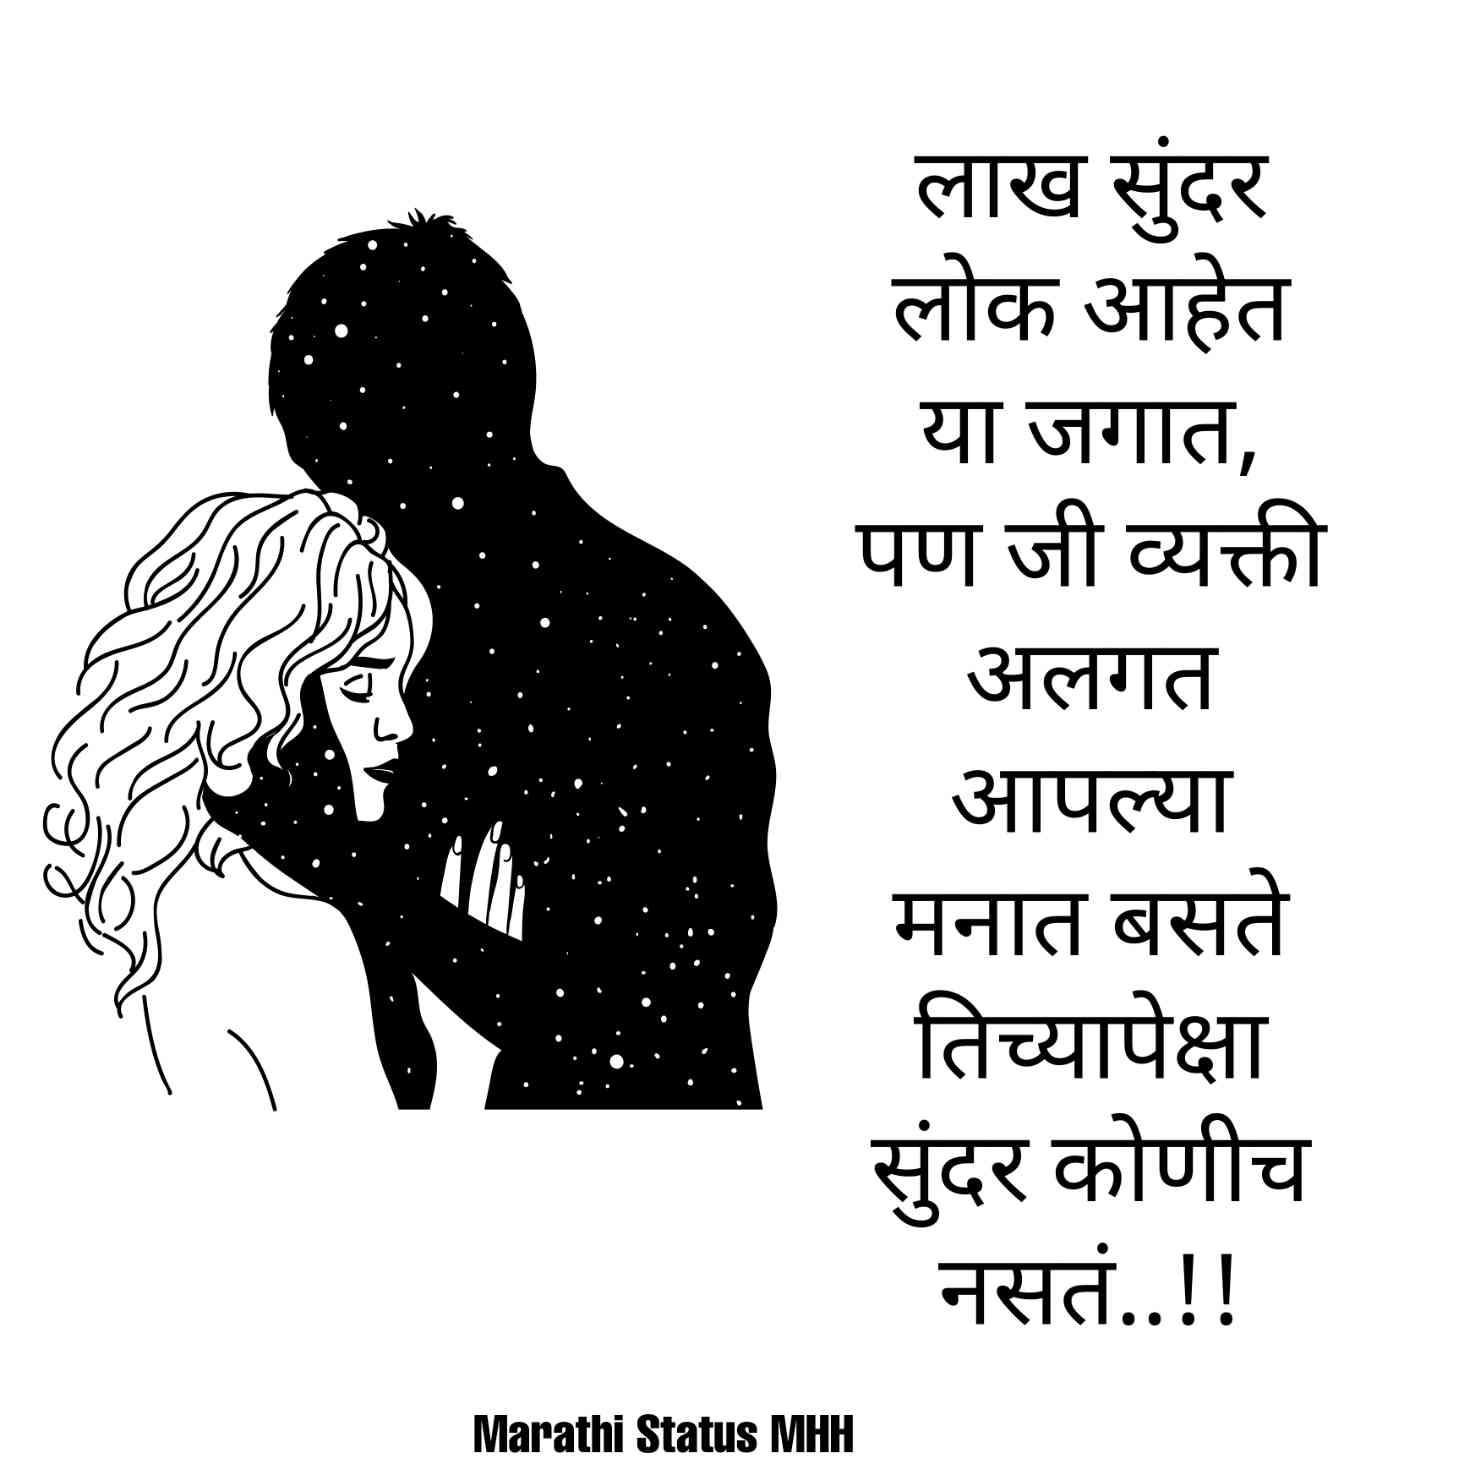 Emotional Heart touching love quotes in marathi